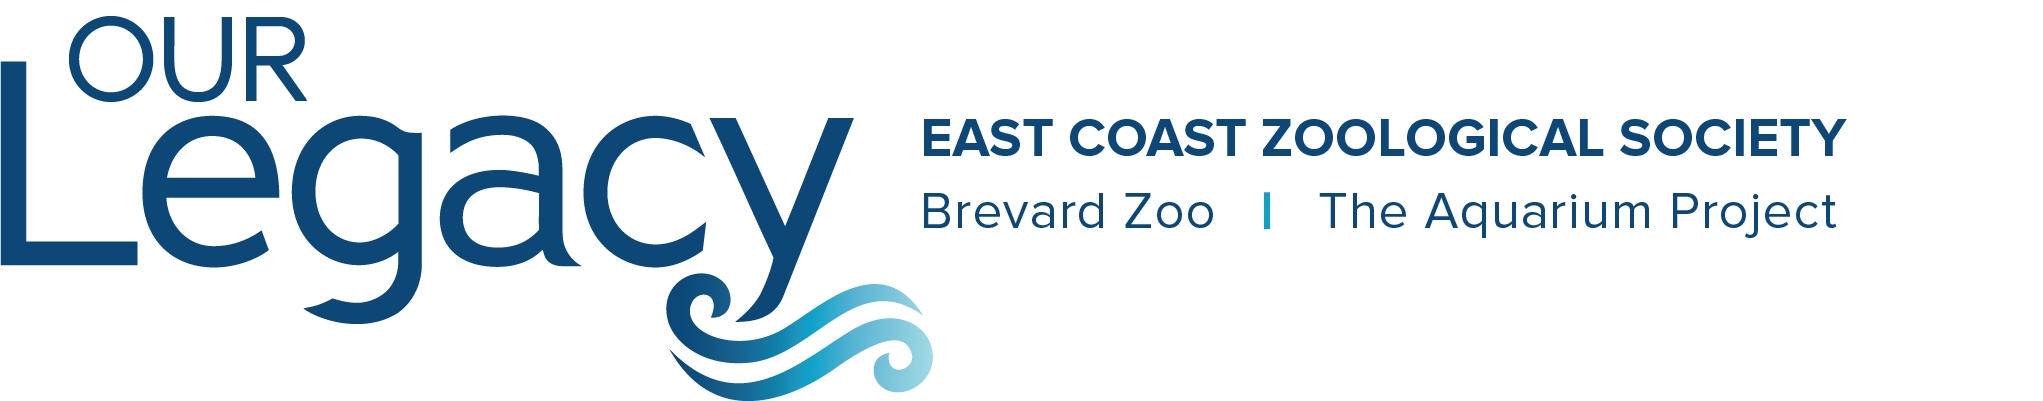 Our Legacy Campaign of Brevard Zoo